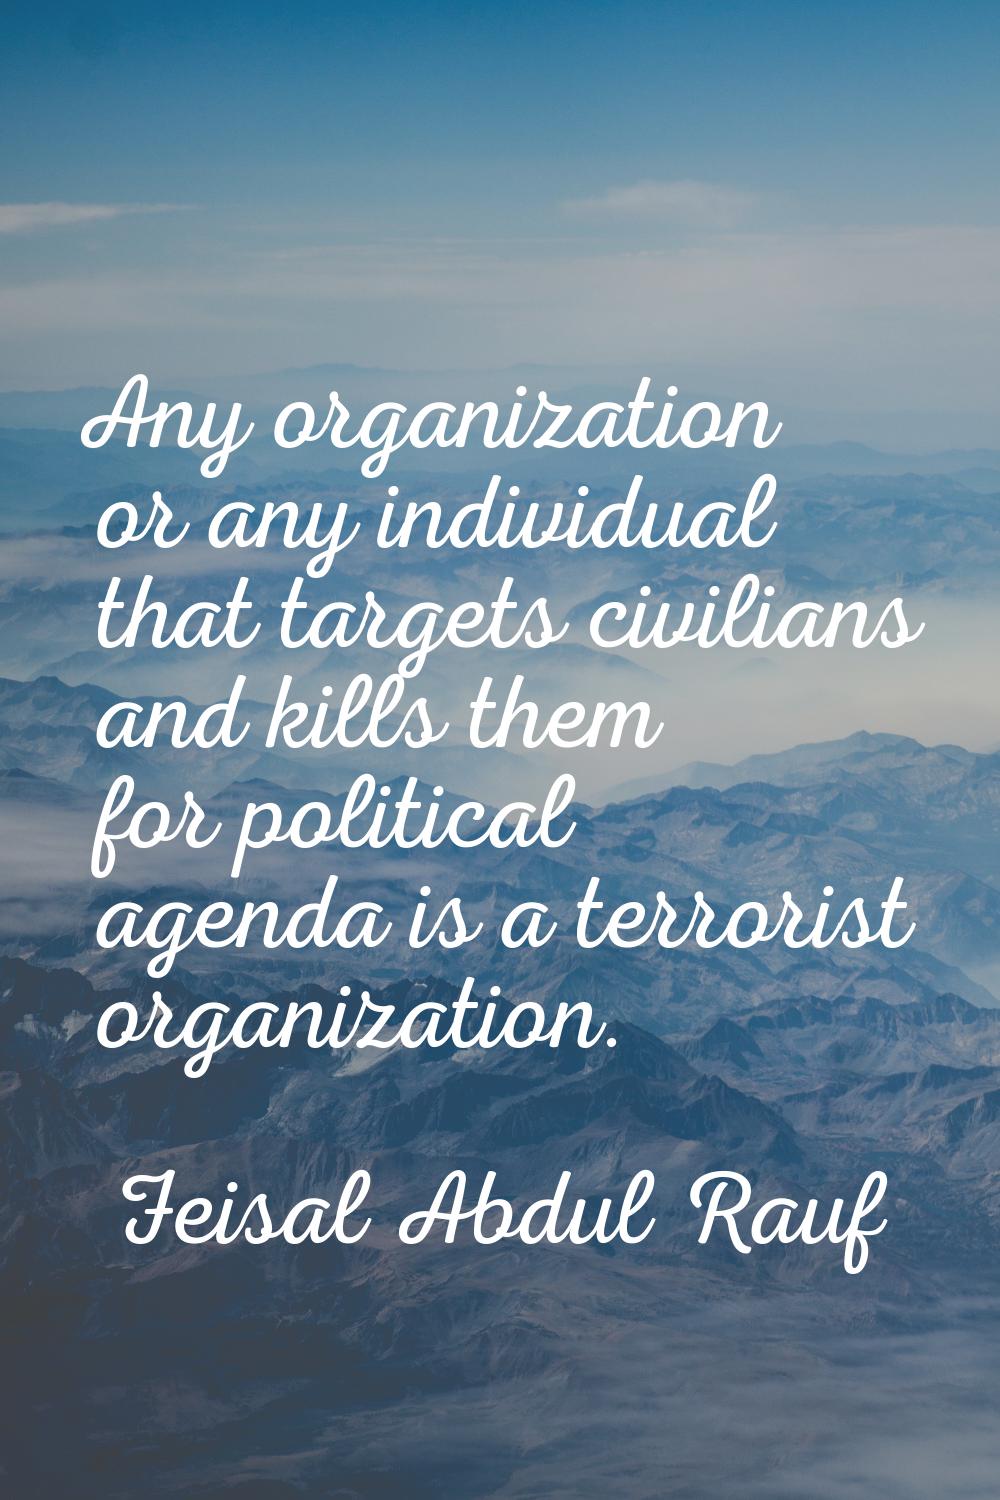 Any organization or any individual that targets civilians and kills them for political agenda is a 